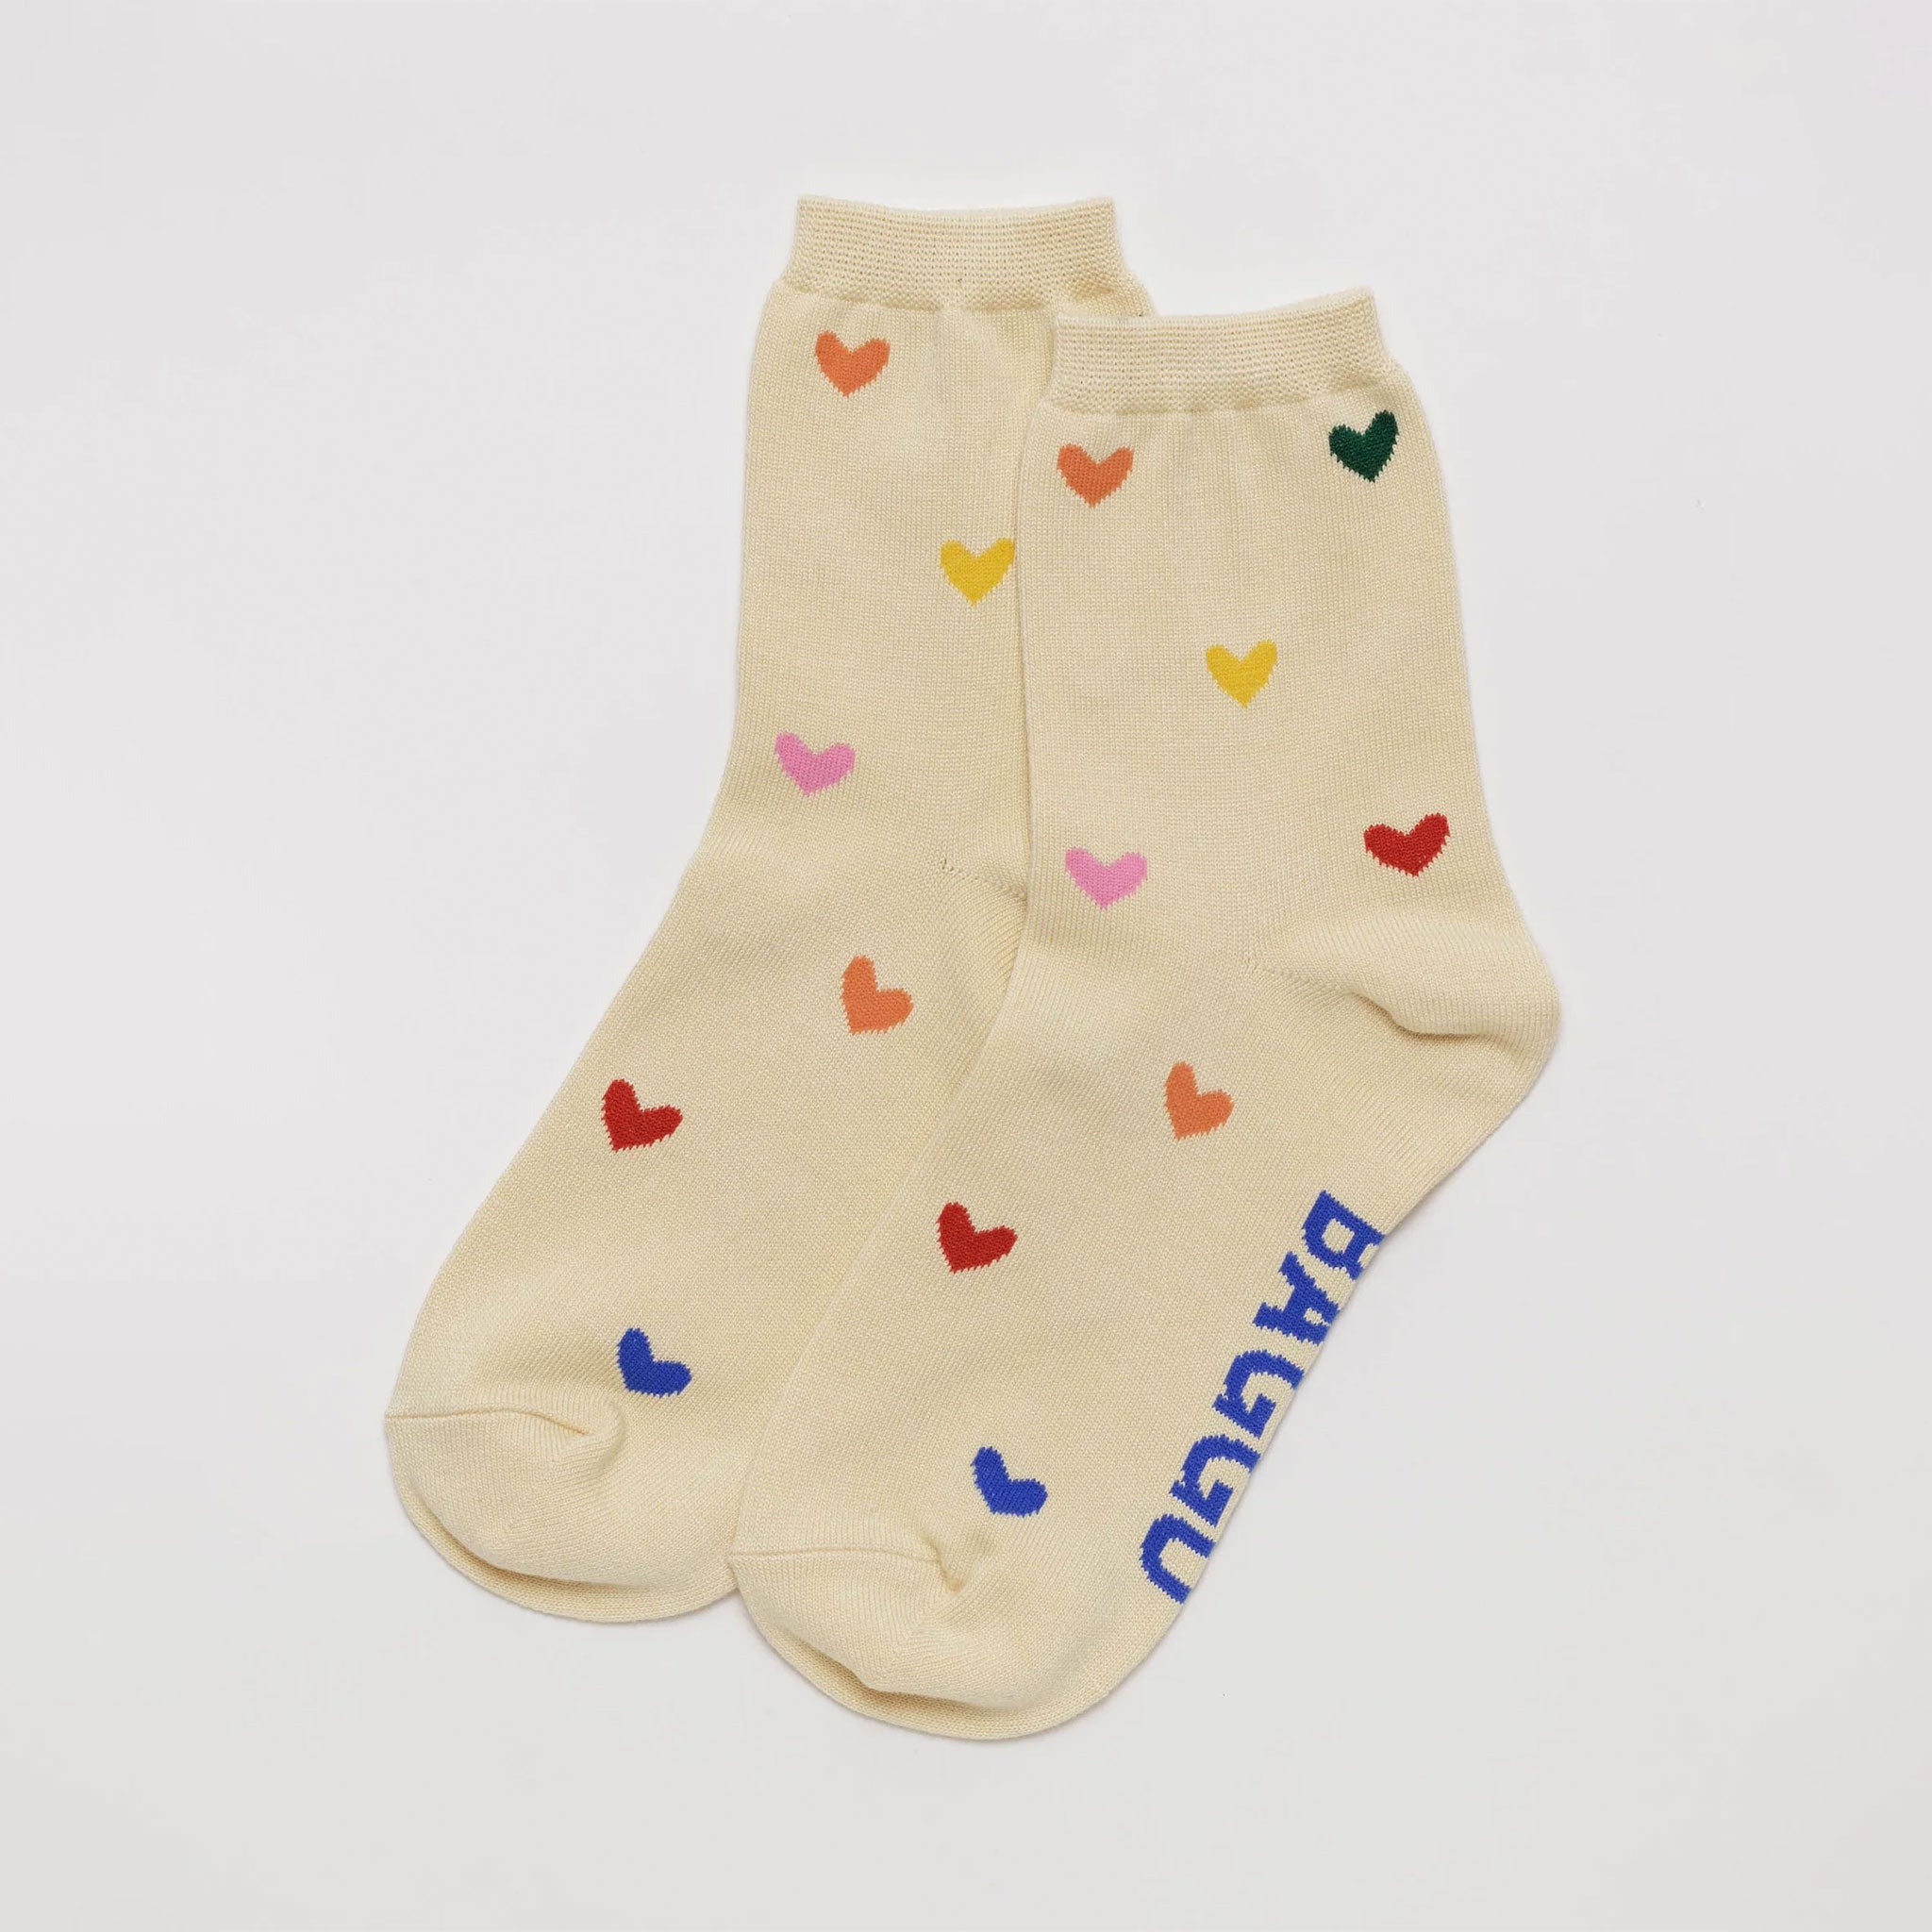 neutral socks witch small colorful hearts